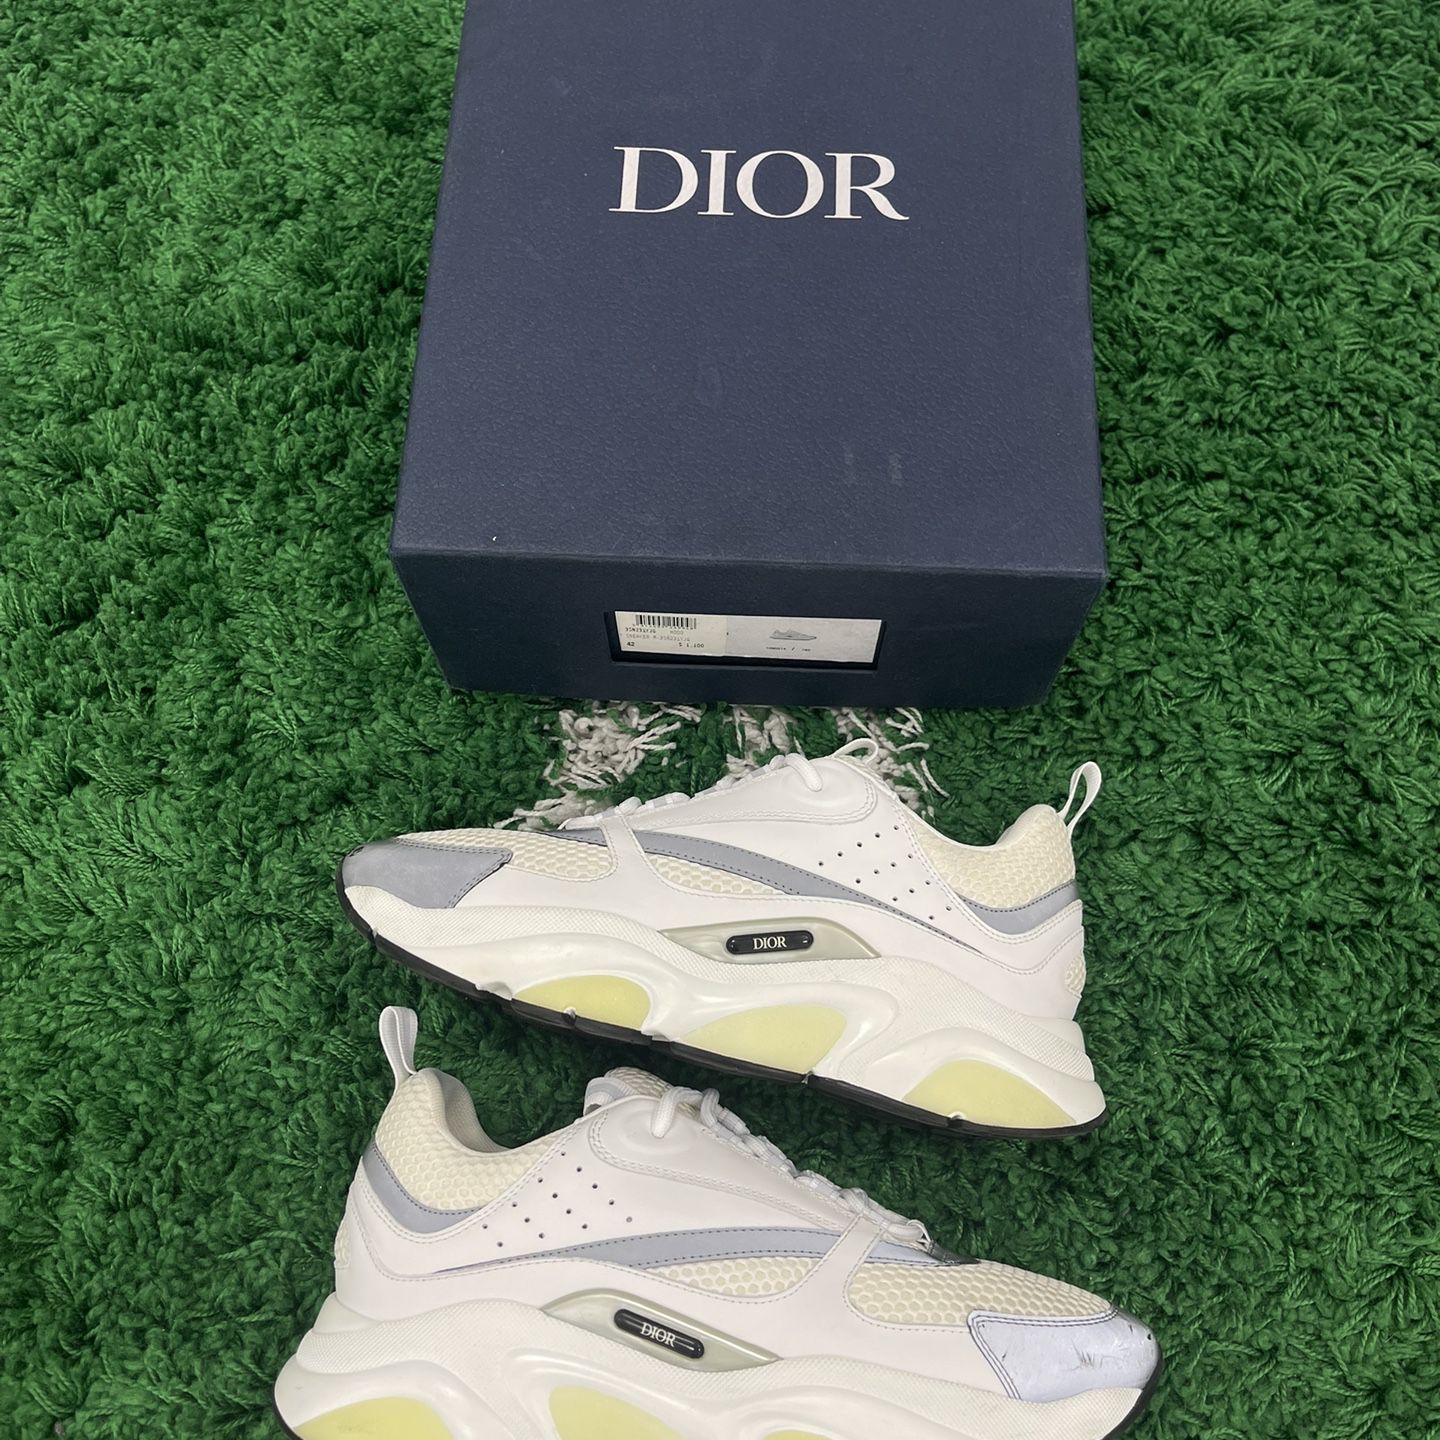 Dior B22 White Sneaker Review & On Foot 